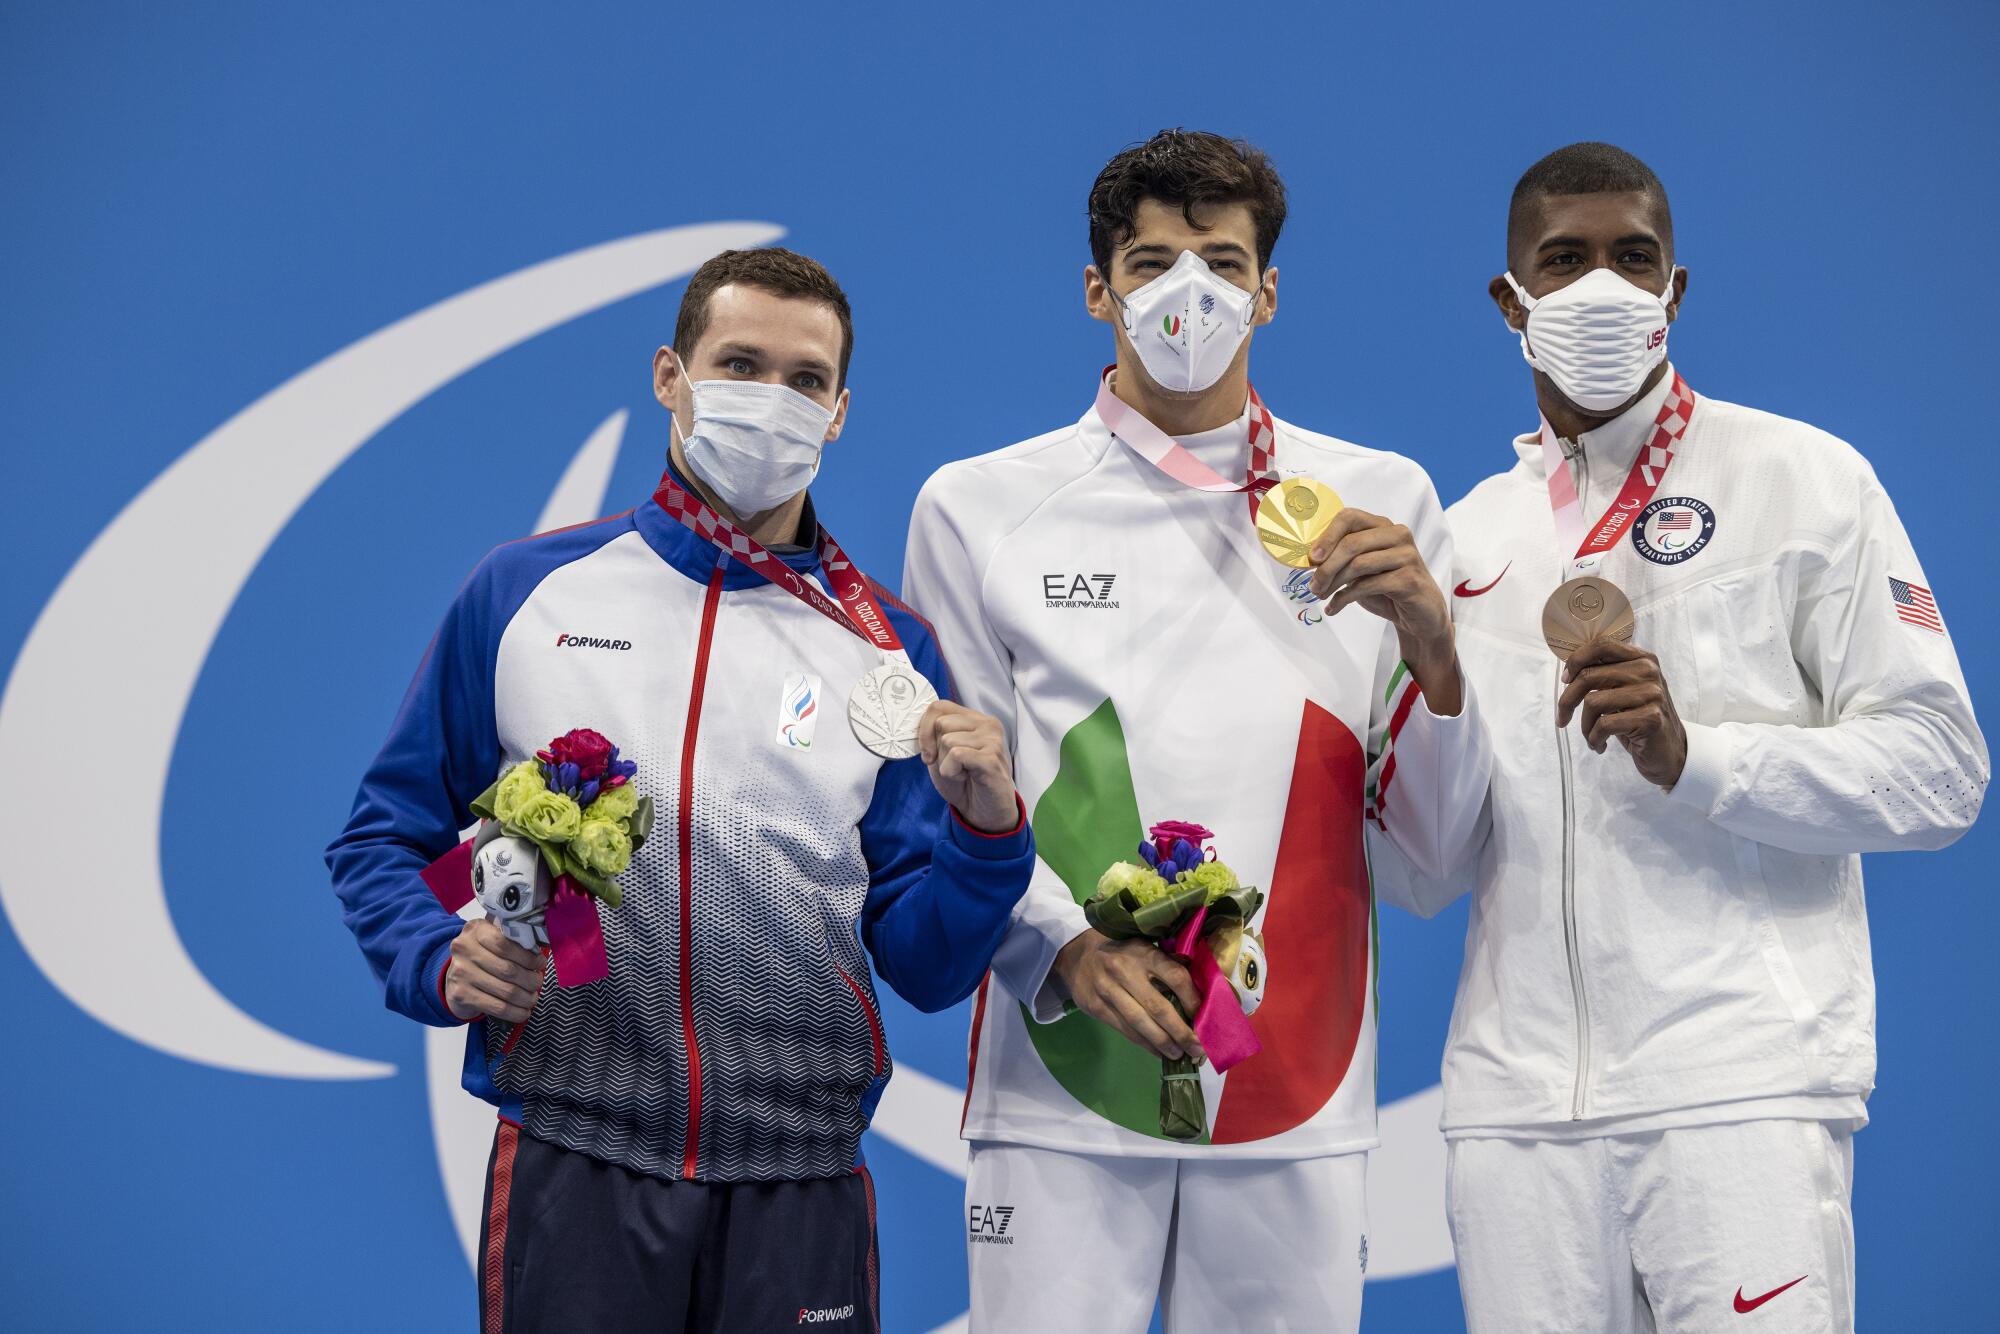 Jamal Hill, right, holds his bronze medal next to silver medalist Denis Tarasov and gold medalist Simone Barlaam